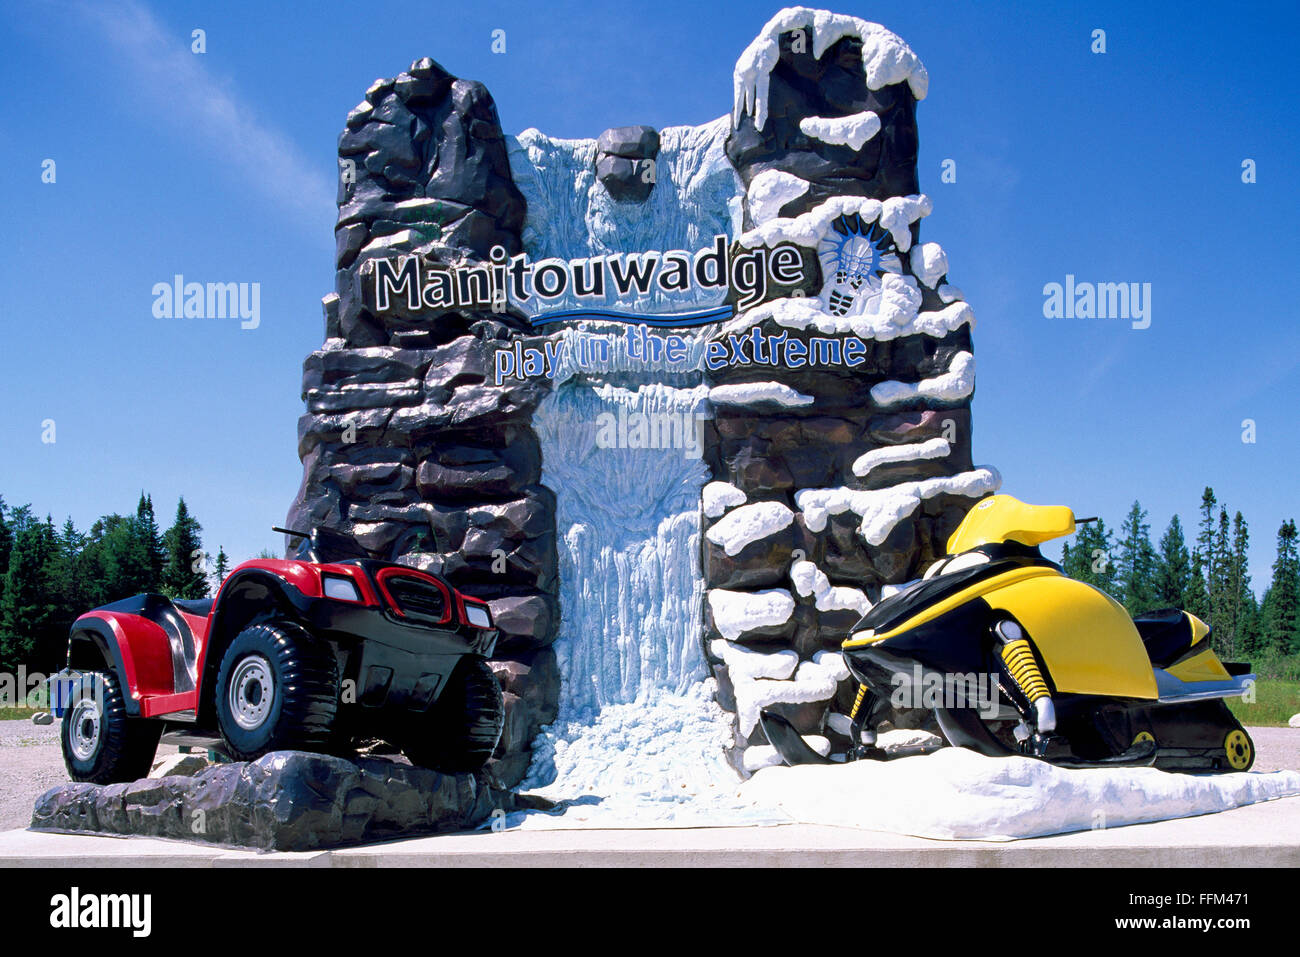 Welcome Sign to Town of Manitouwadge, Ontario, Canada - ATV and Skidoo showcase Local Summer and Winter Recreational Activities Stock Photo